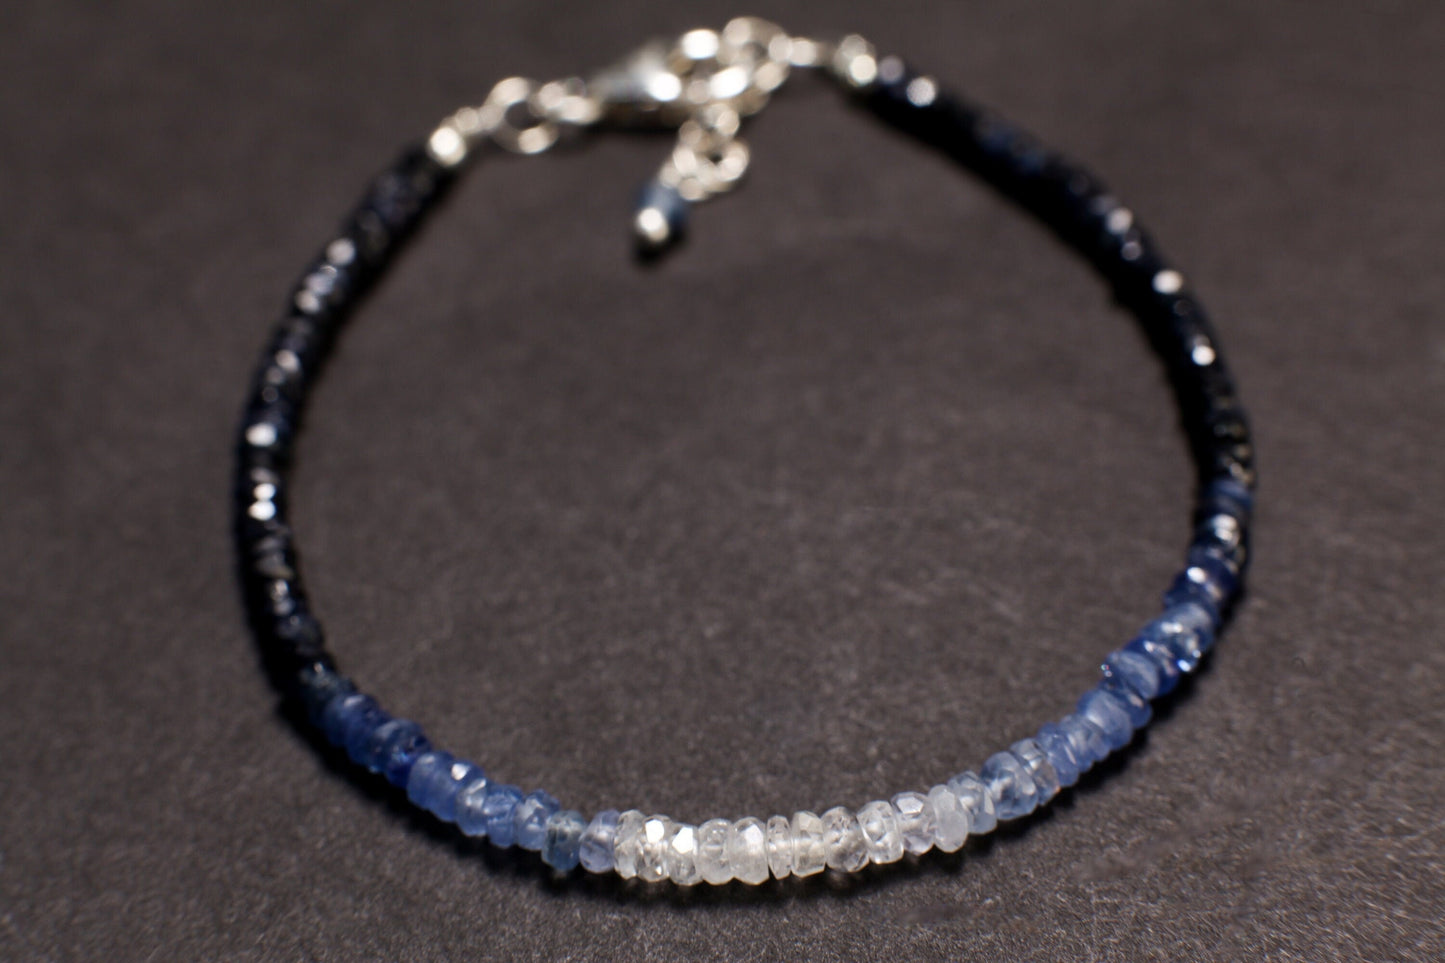 Ombre Sapphire Faceted Rondelle 2.8-3mm Bracelet in 925 Sterling Silver Clasp and 1&quot; Extension Chain, AAAQuality, September Birthstone, Gift